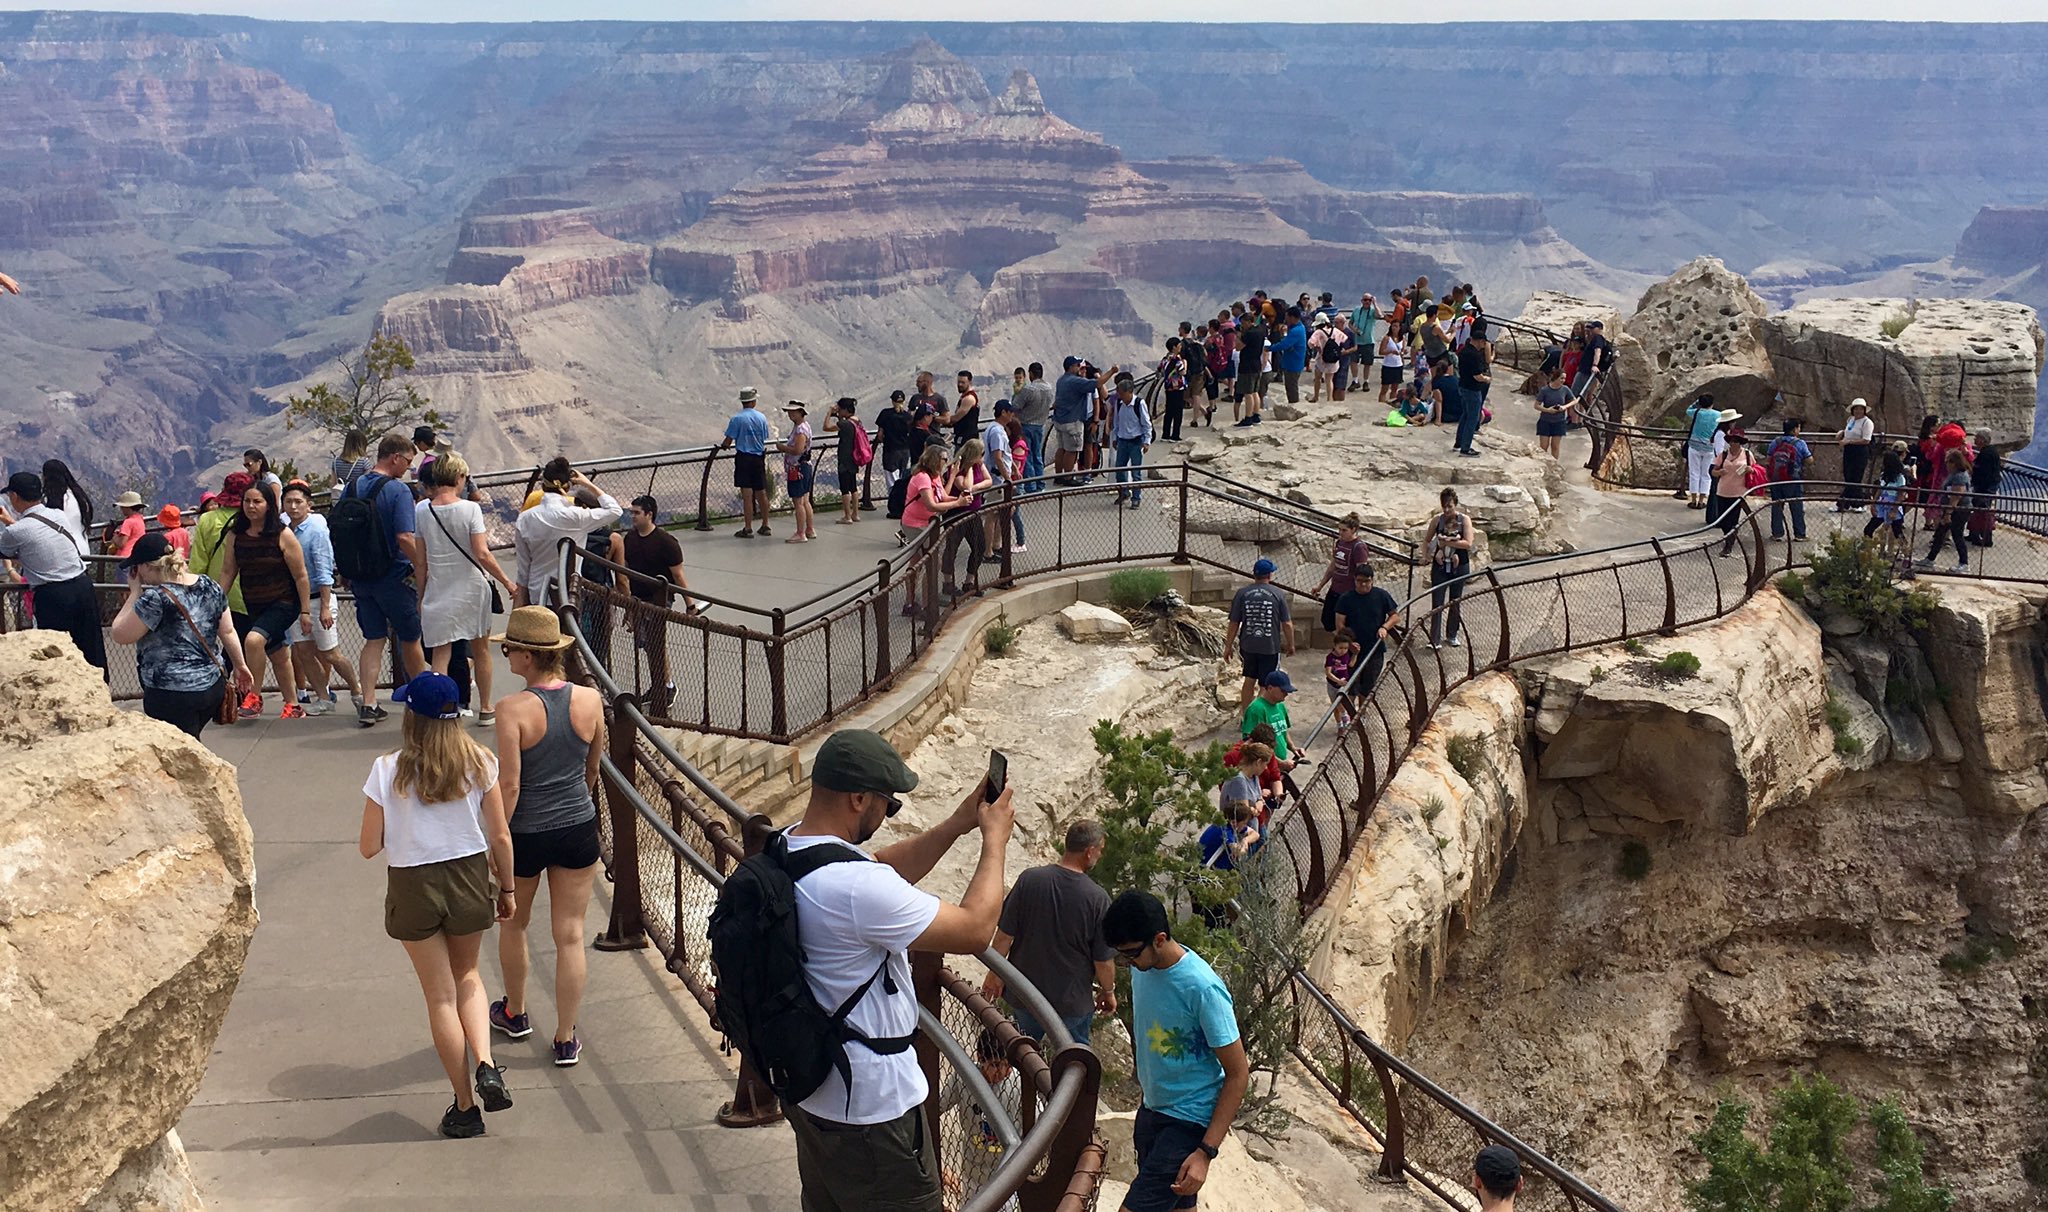 a crowd of people descending steps at a scenic overlook encircled by metal guardrails.  In the distance, an impressive peak rising out of canyon depths.